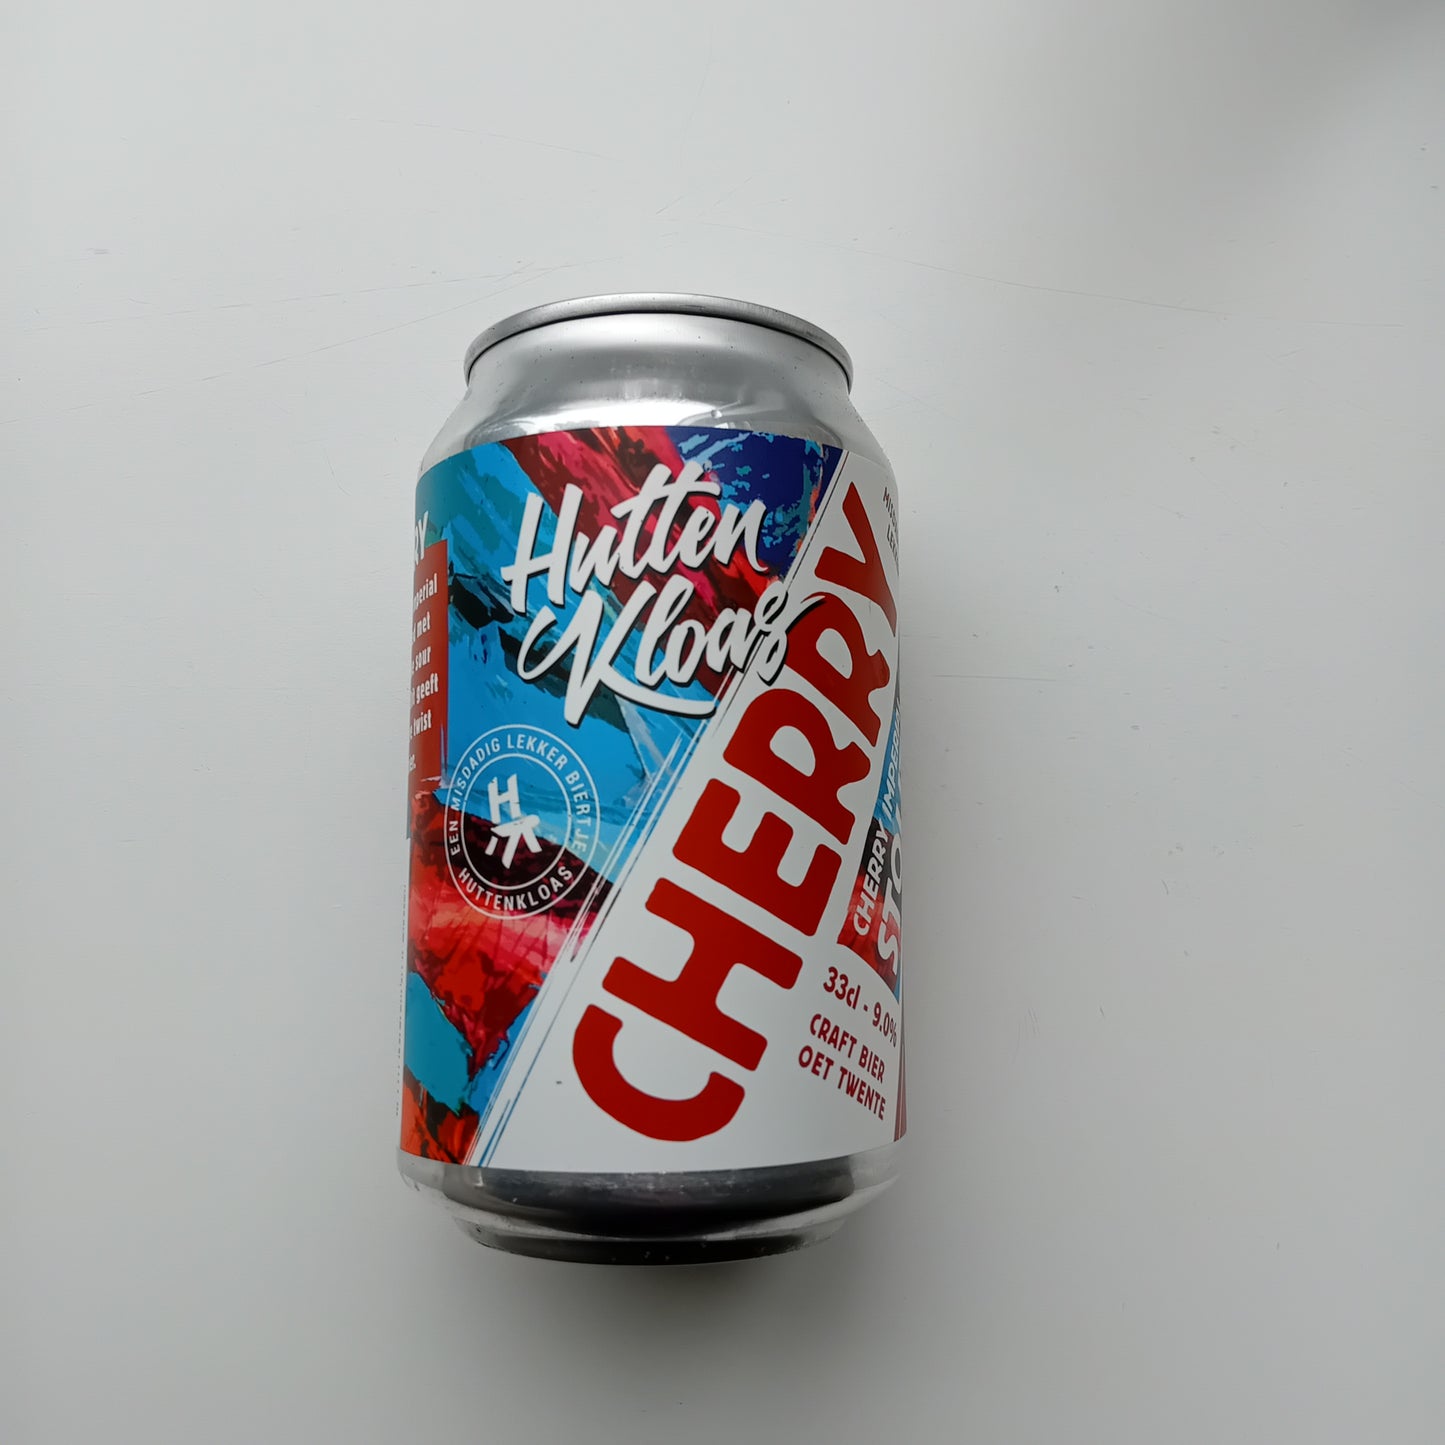 Huttenkloas Cherry Imperial Stout - 330ml - 9,0%